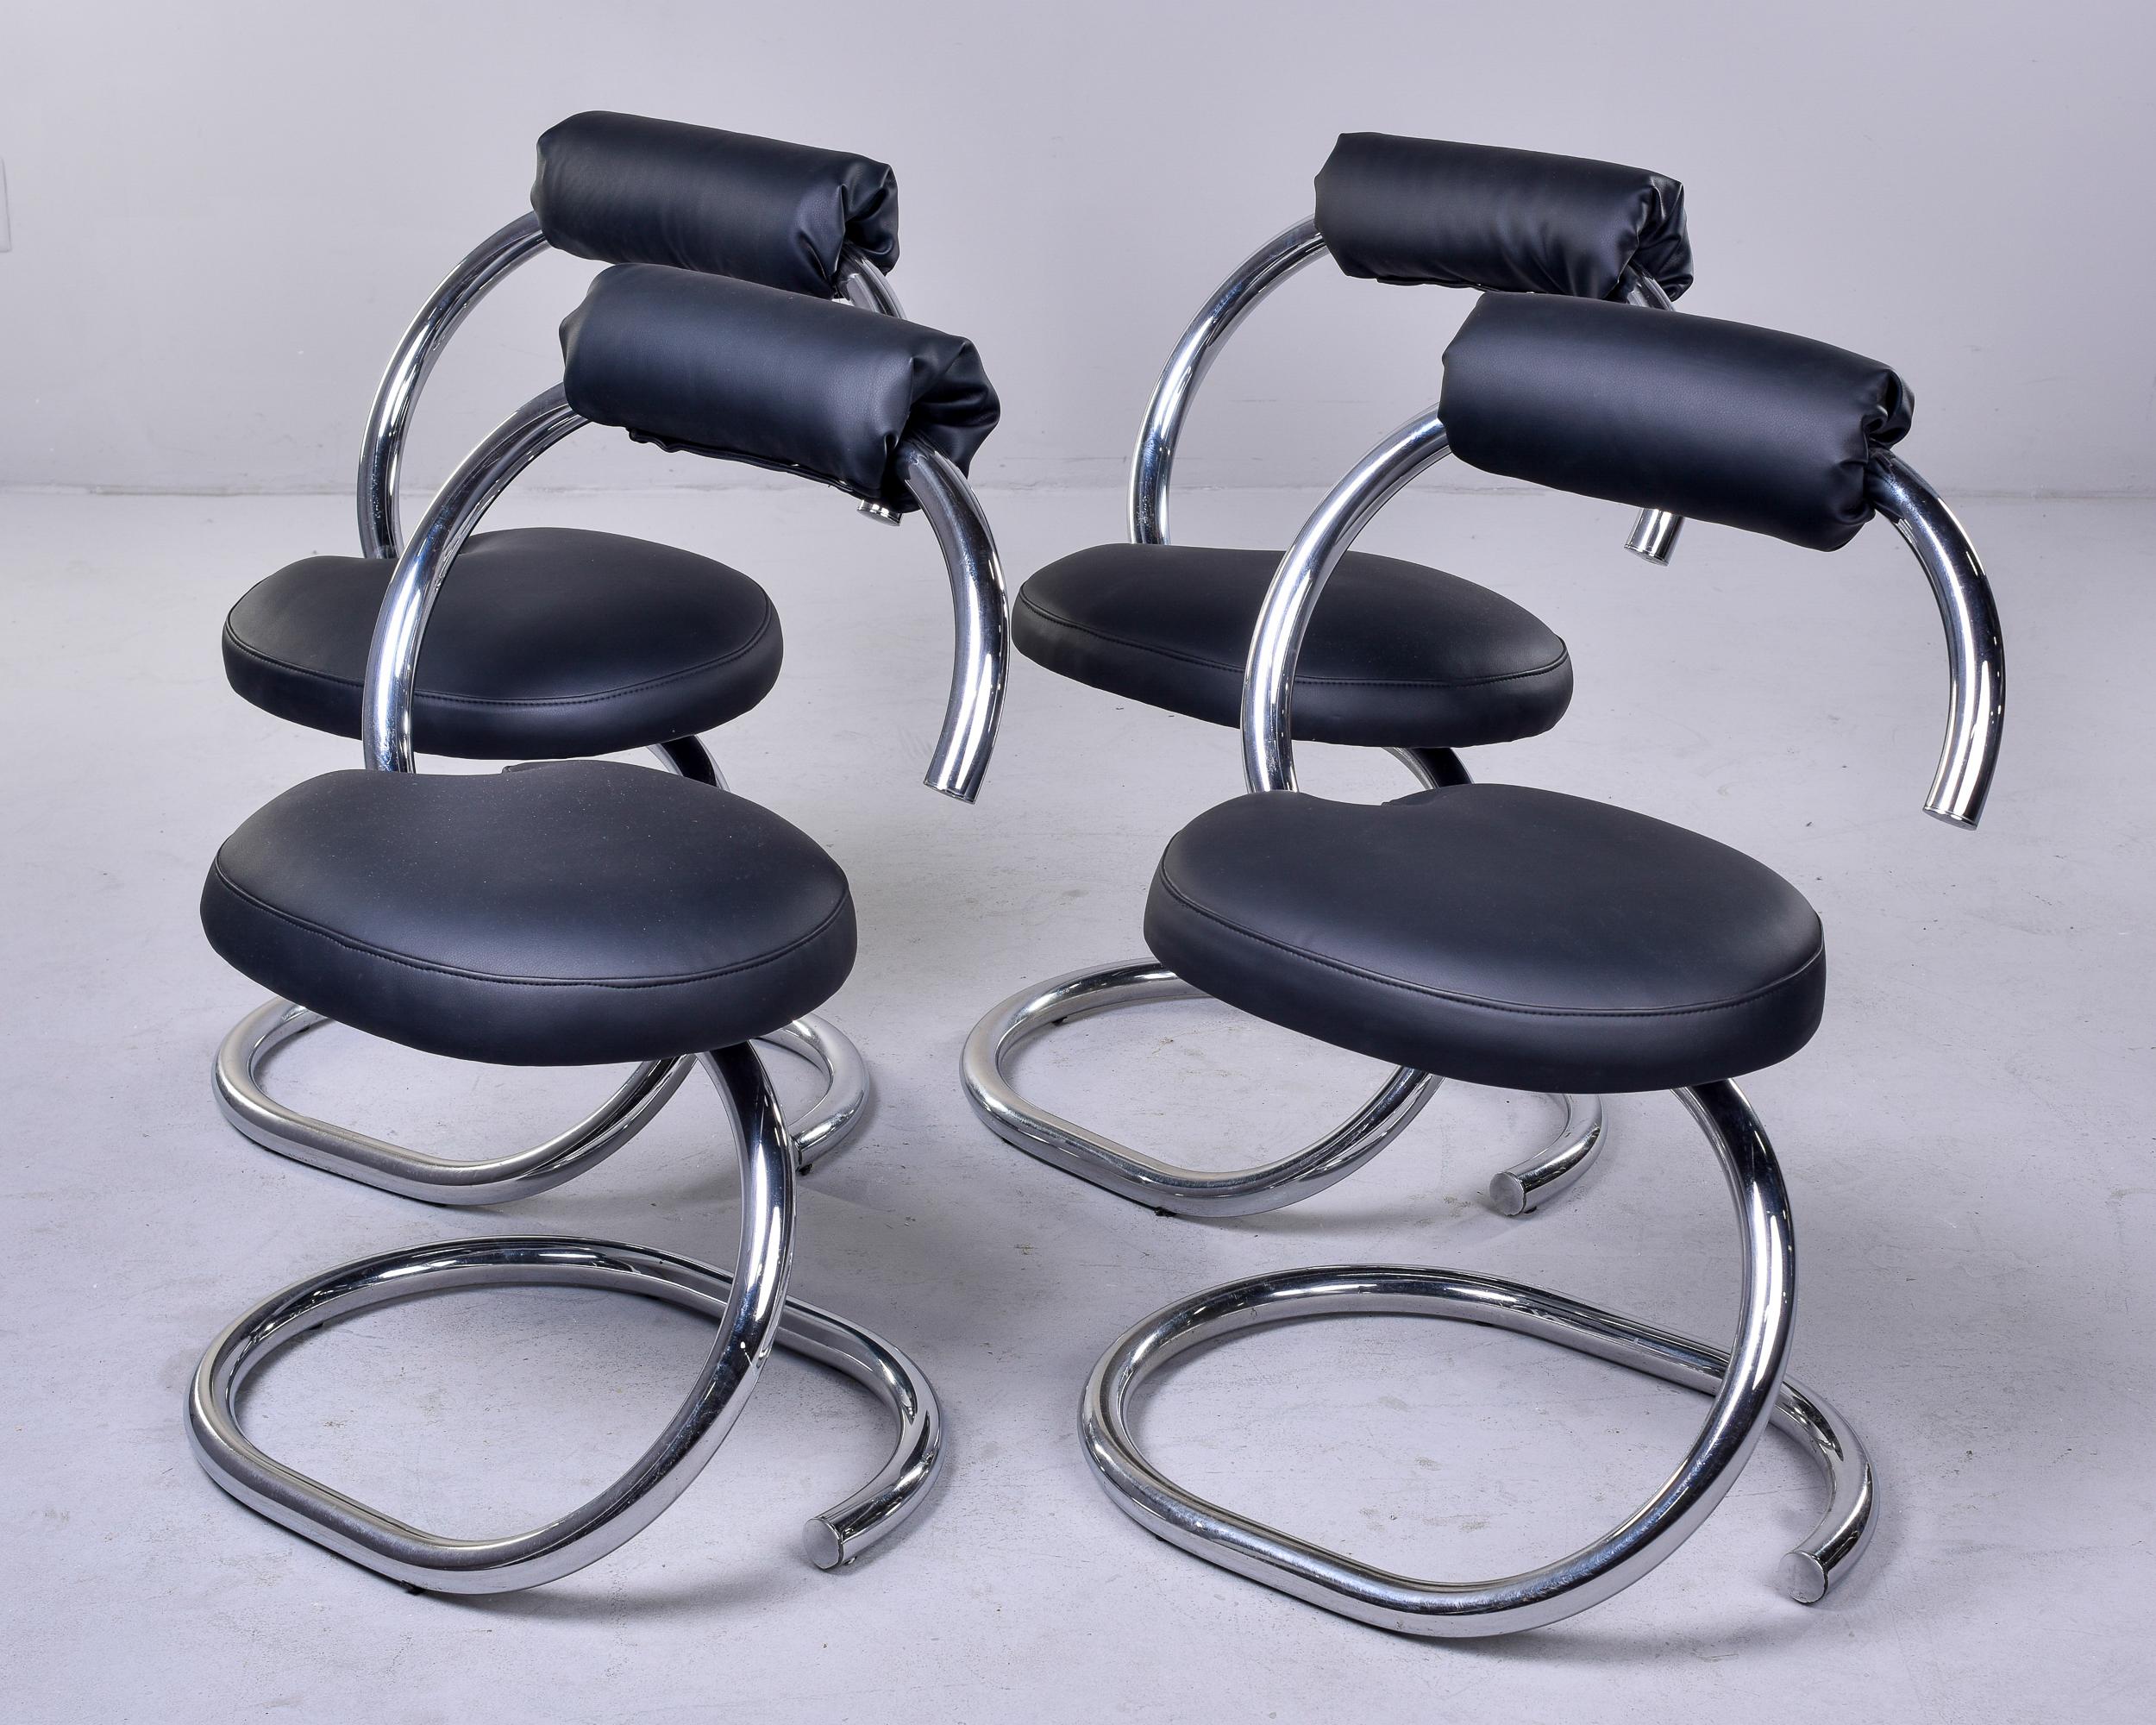 French Set of 4 Mid-Century Modern Chrome Chairs with Black Upholstery For Sale